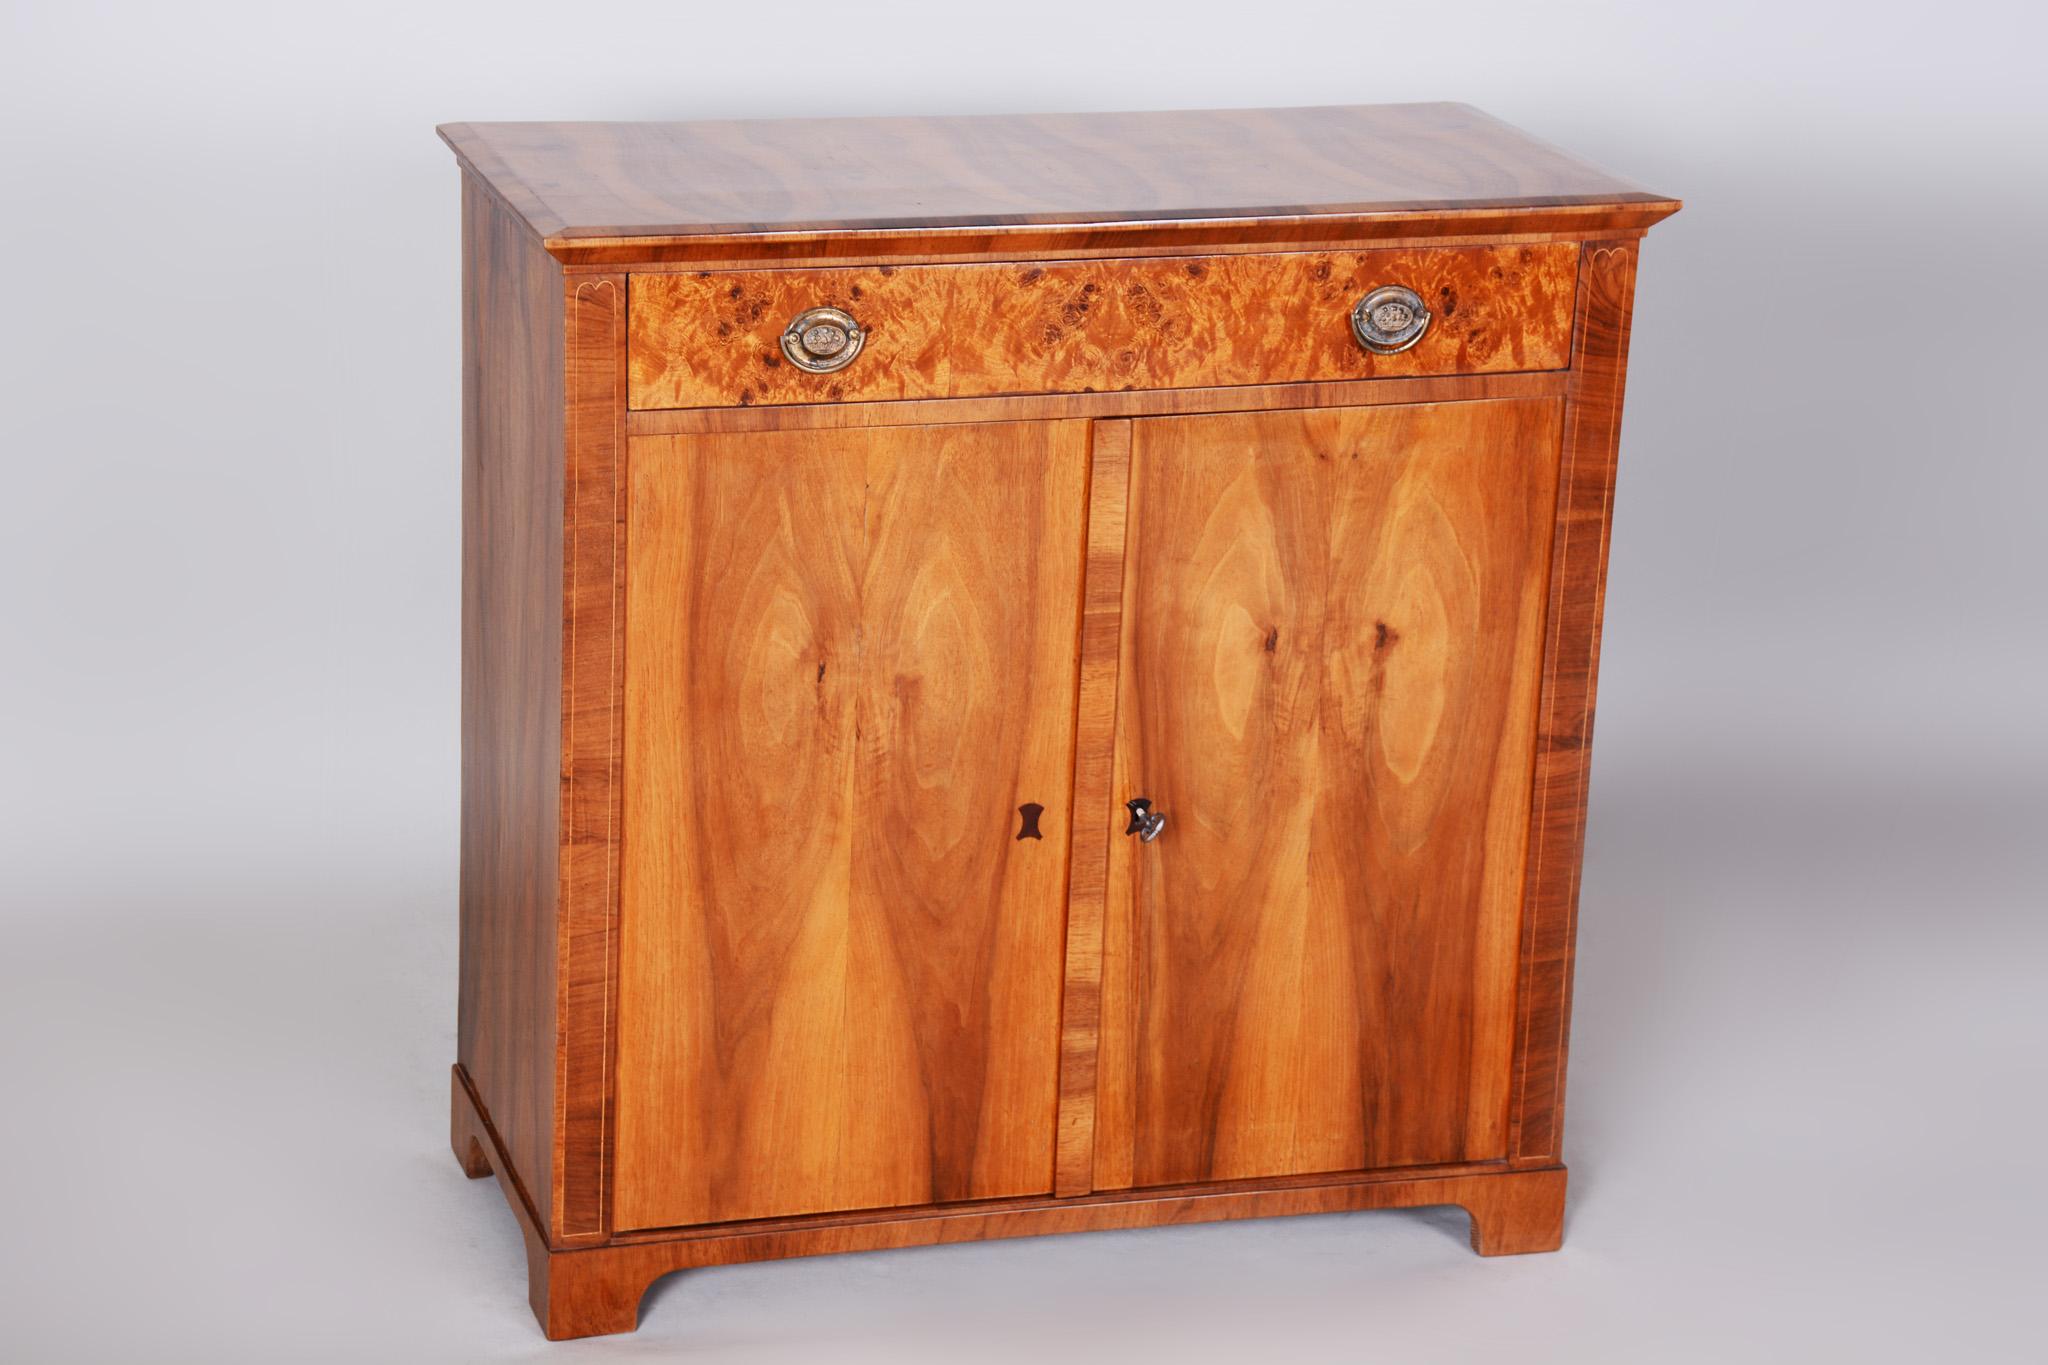 Biedermeier Commode Made in Czechia, circa 1840, Fully Restored Walnut In Good Condition For Sale In Horomerice, CZ